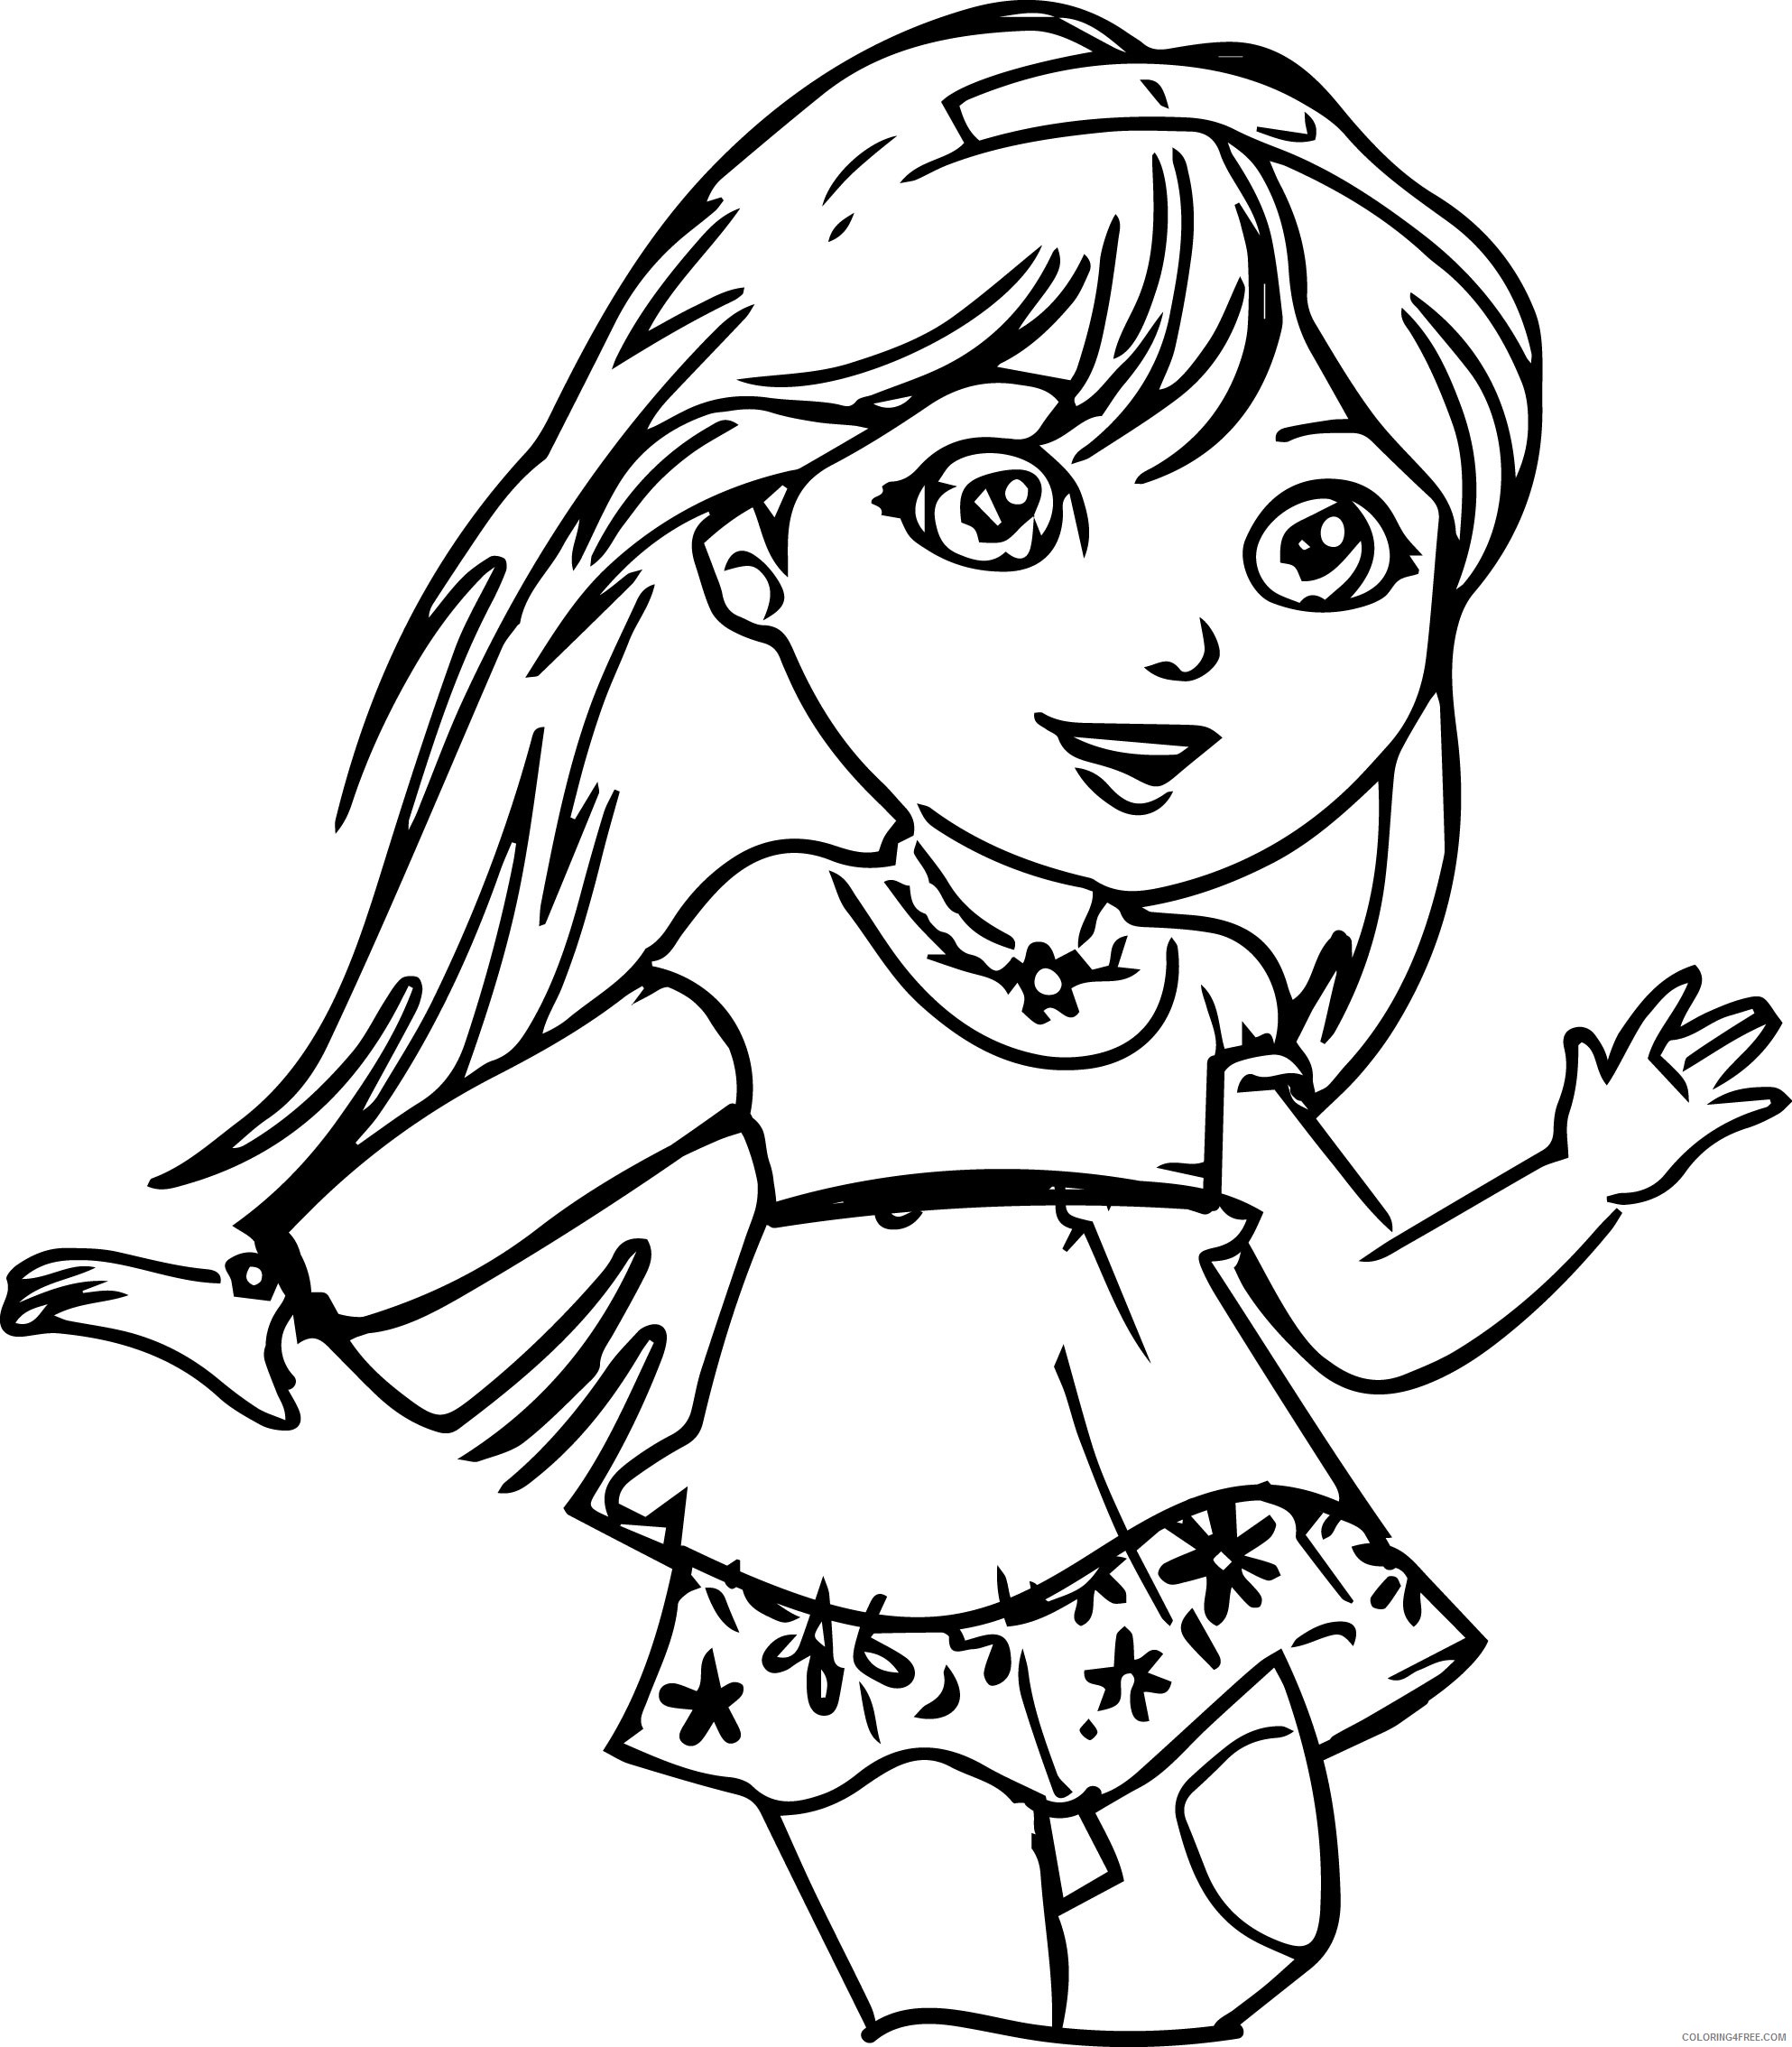 dora teenager coloring pages Coloring4free